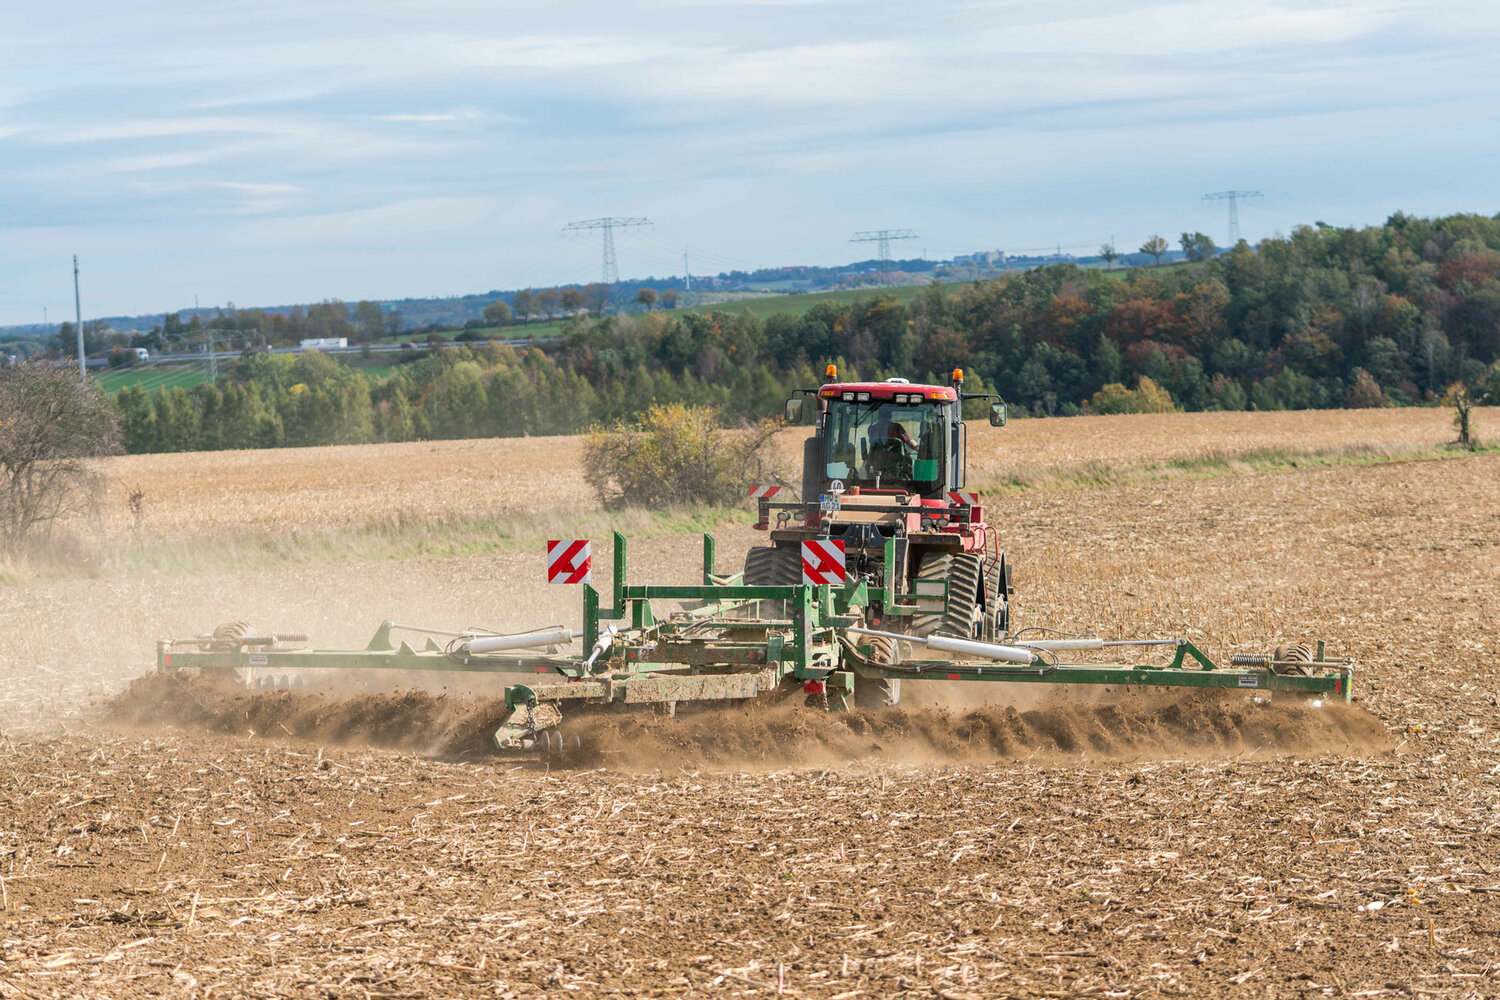 Kelly Tillage makes agricultural machinery.